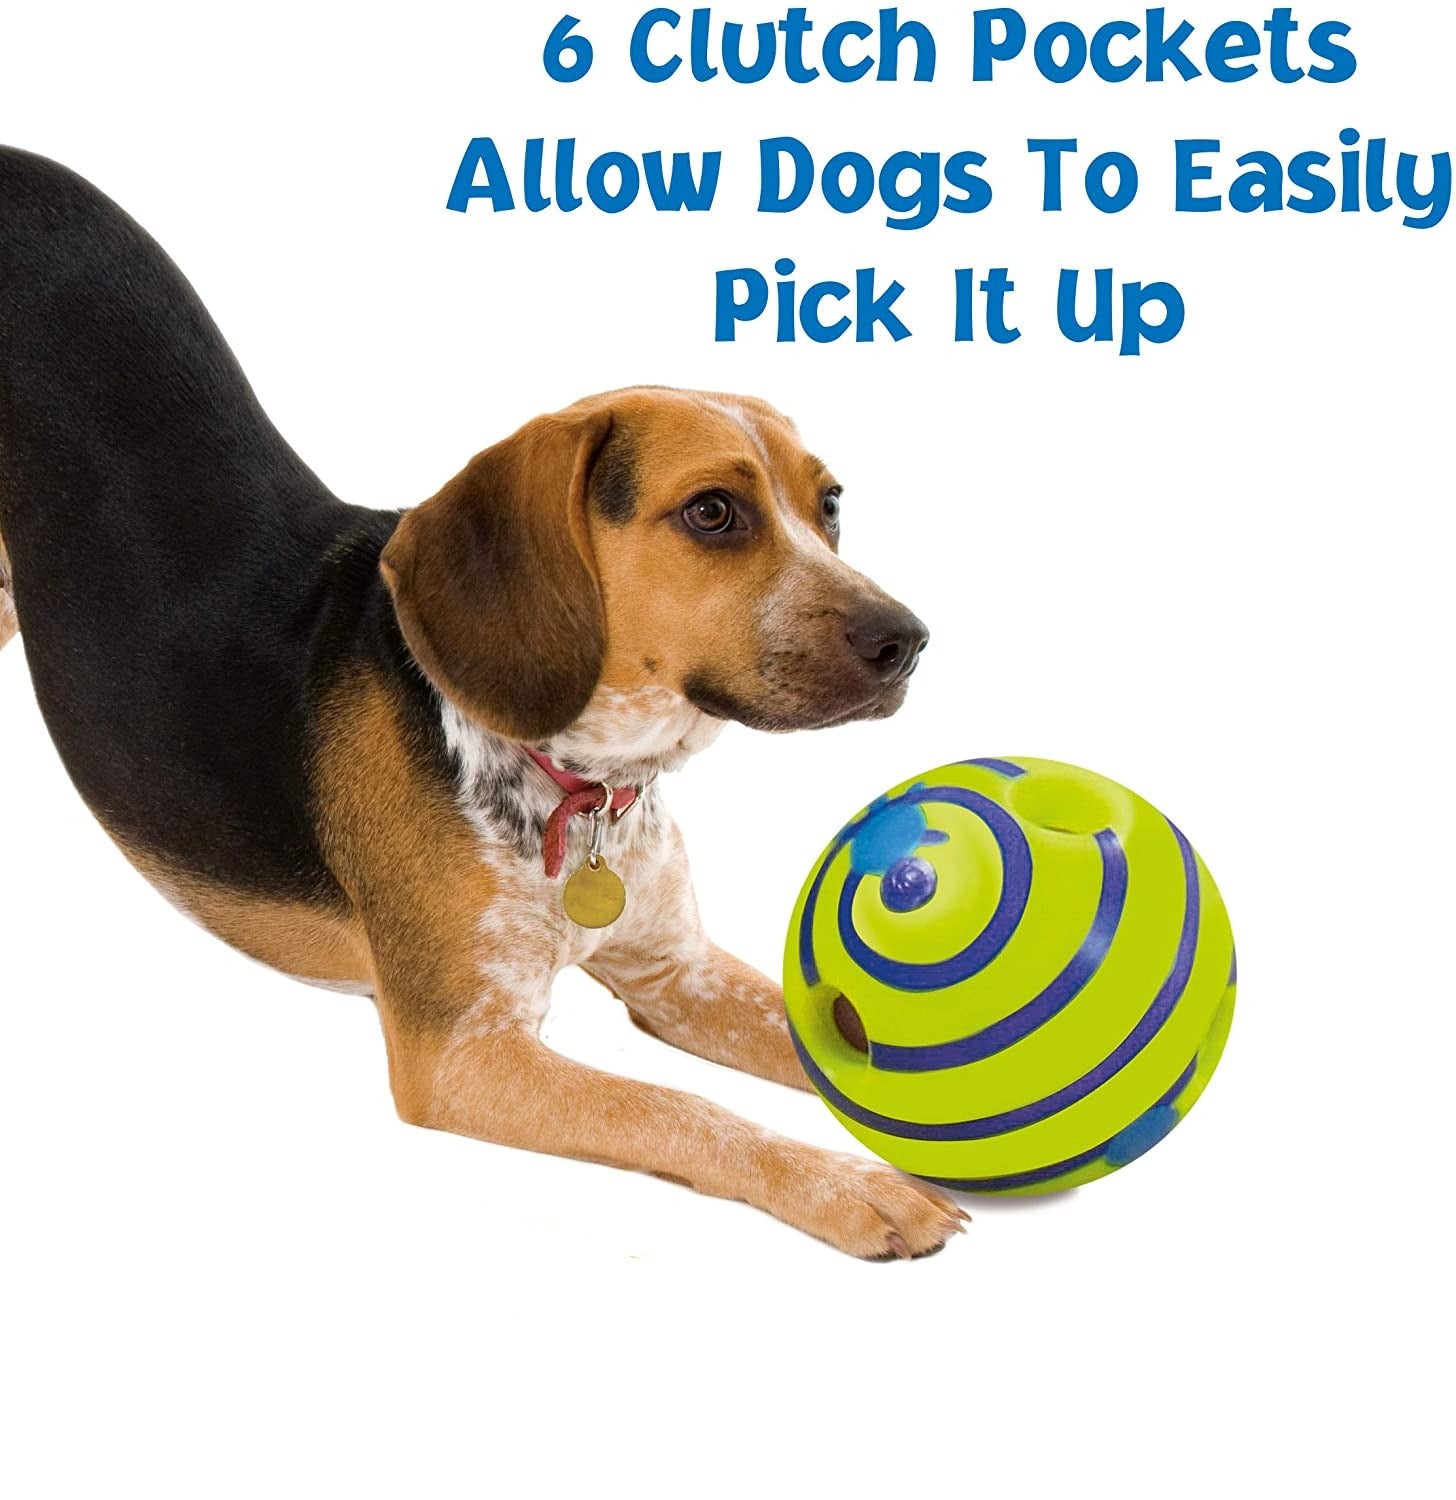 Wobble Giggle Ball - Interactive Dog Toy, Fun Giggle Sounds When Rolled or Shaken - BestBuddyStore